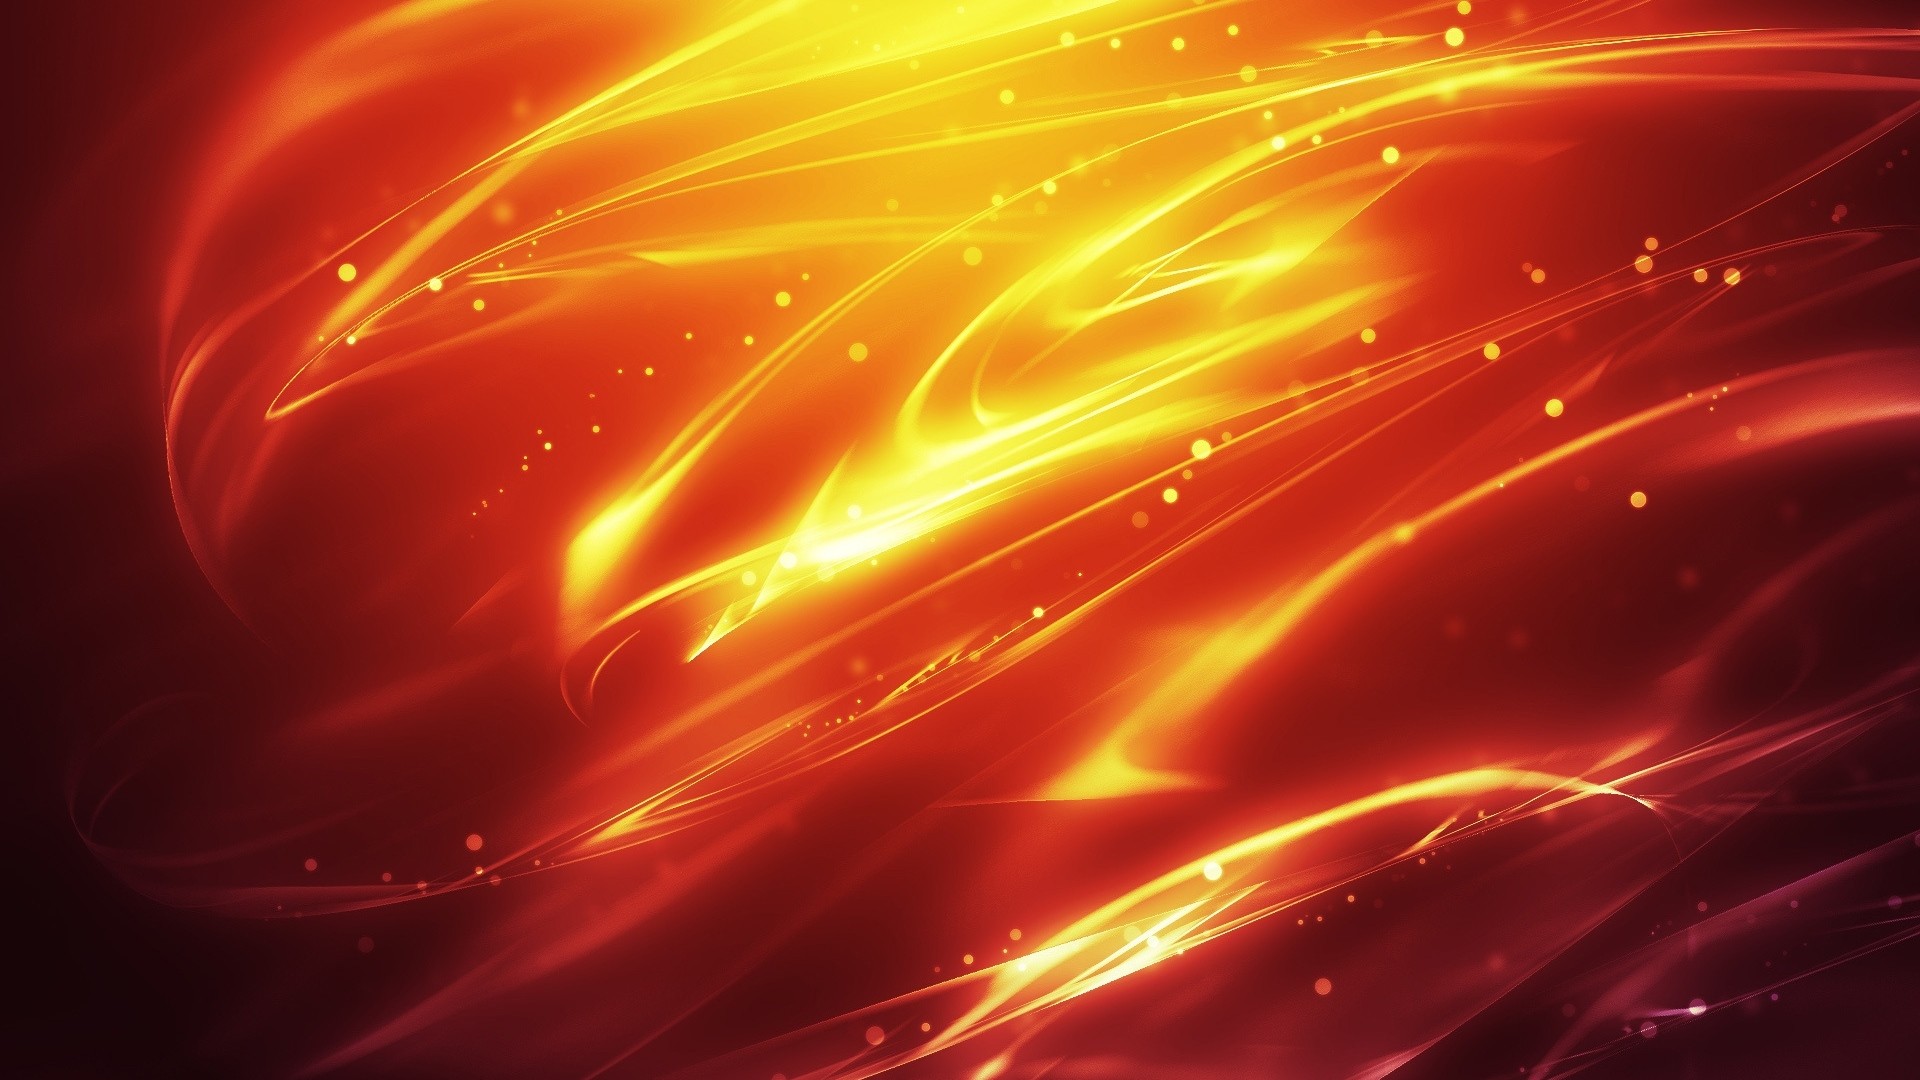 1920x1080 Cool Fire Wallpapers HD Android Apps on Google Play 1920Ã1080